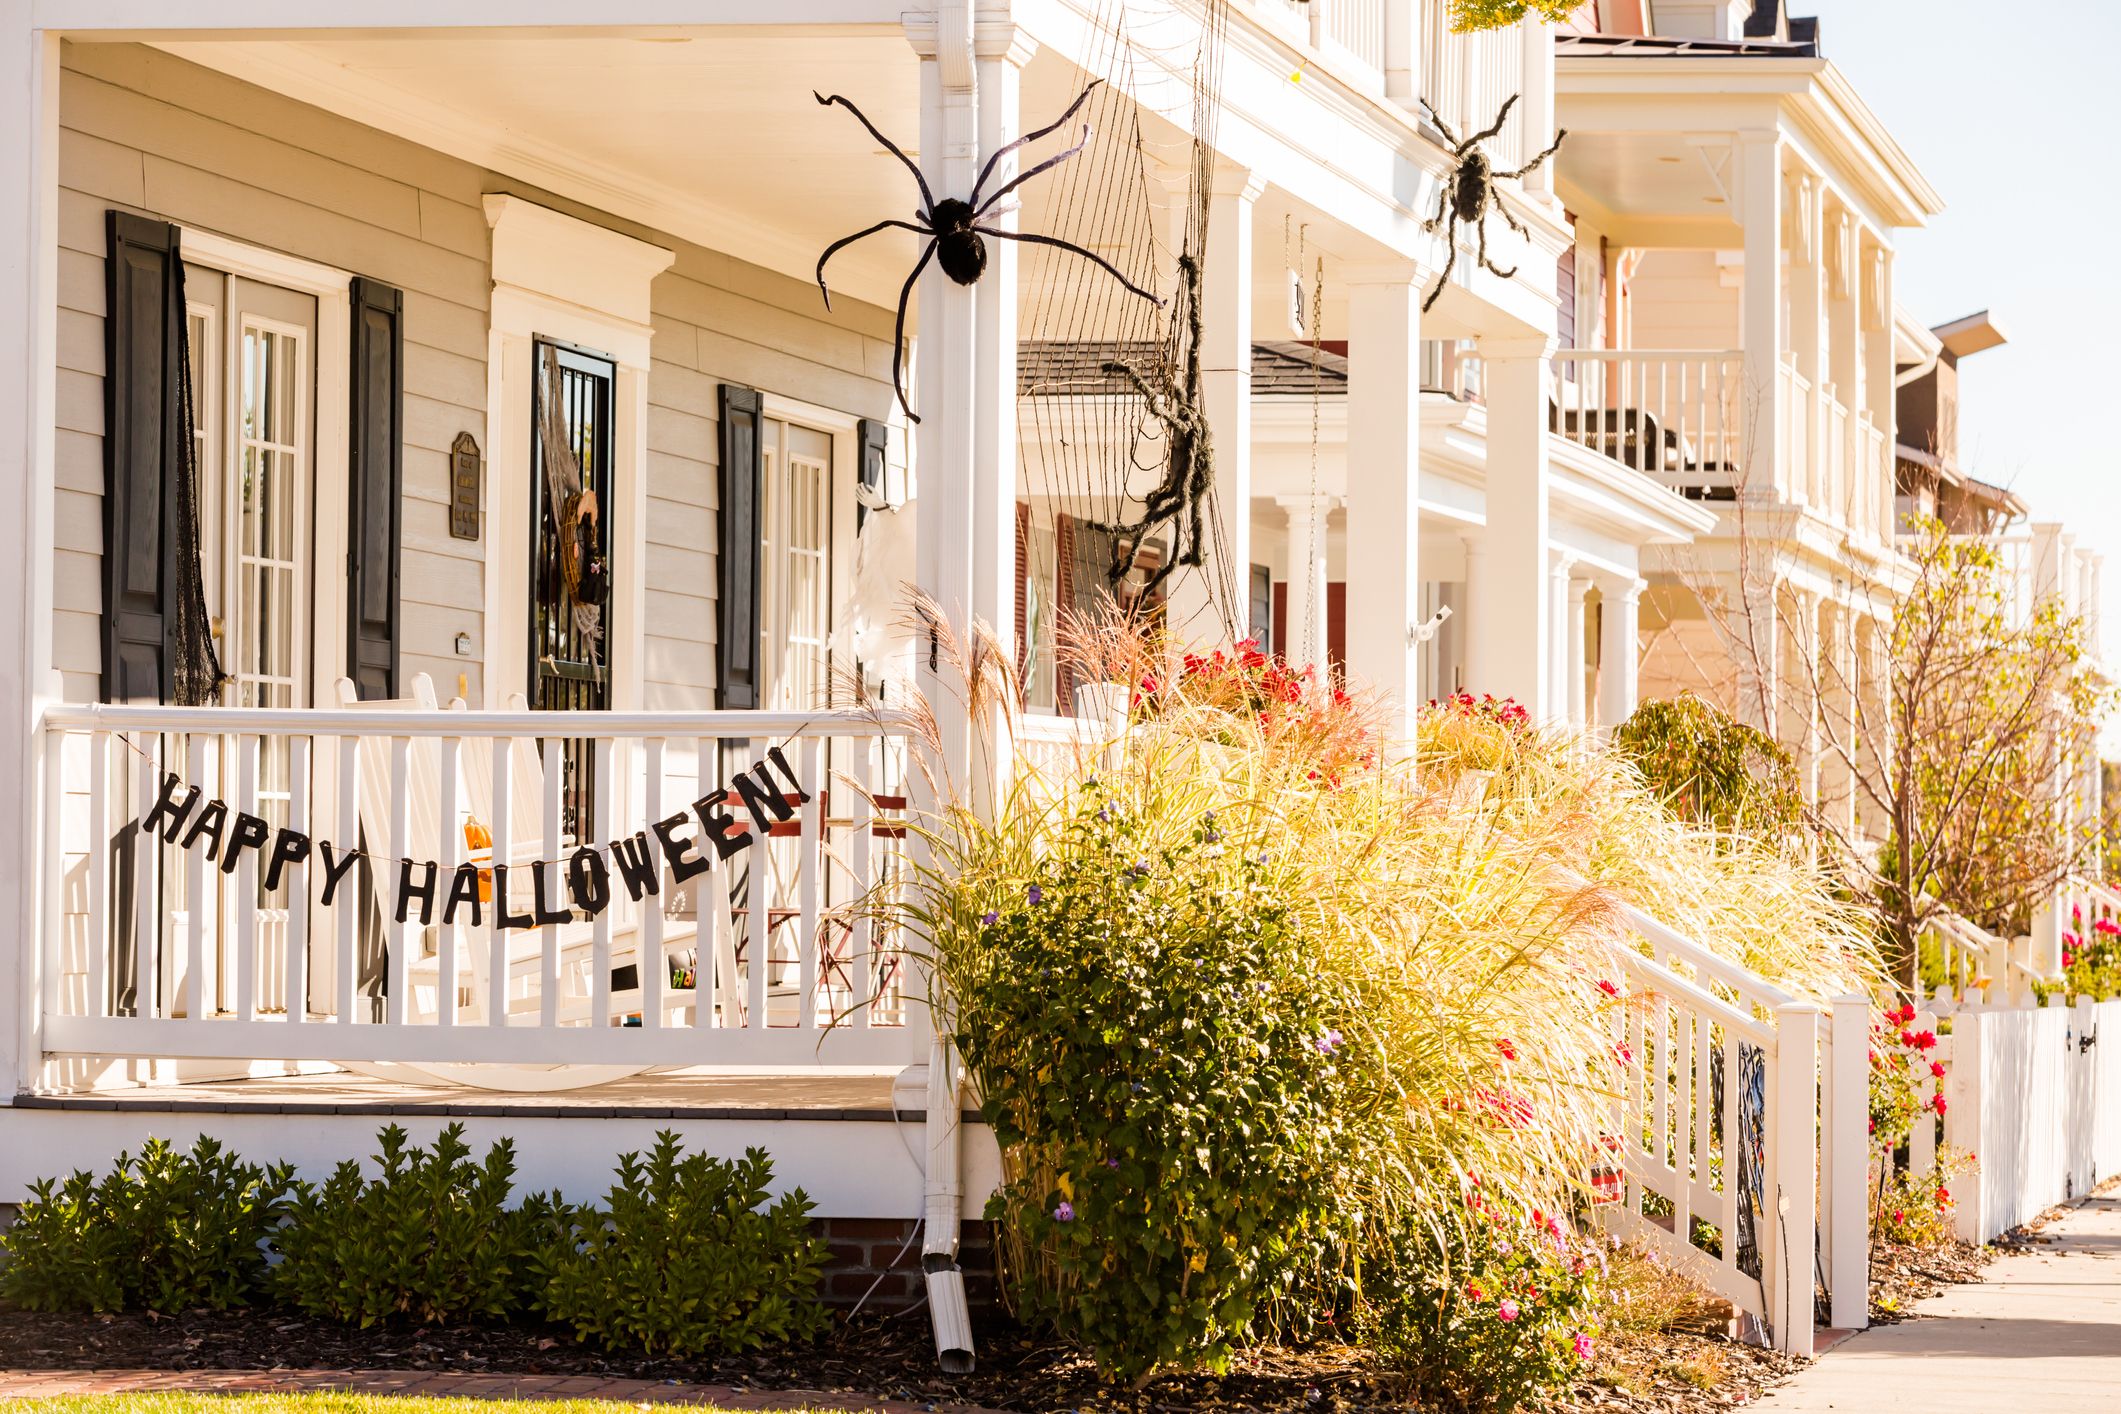 cheapest place to get halloween decorations